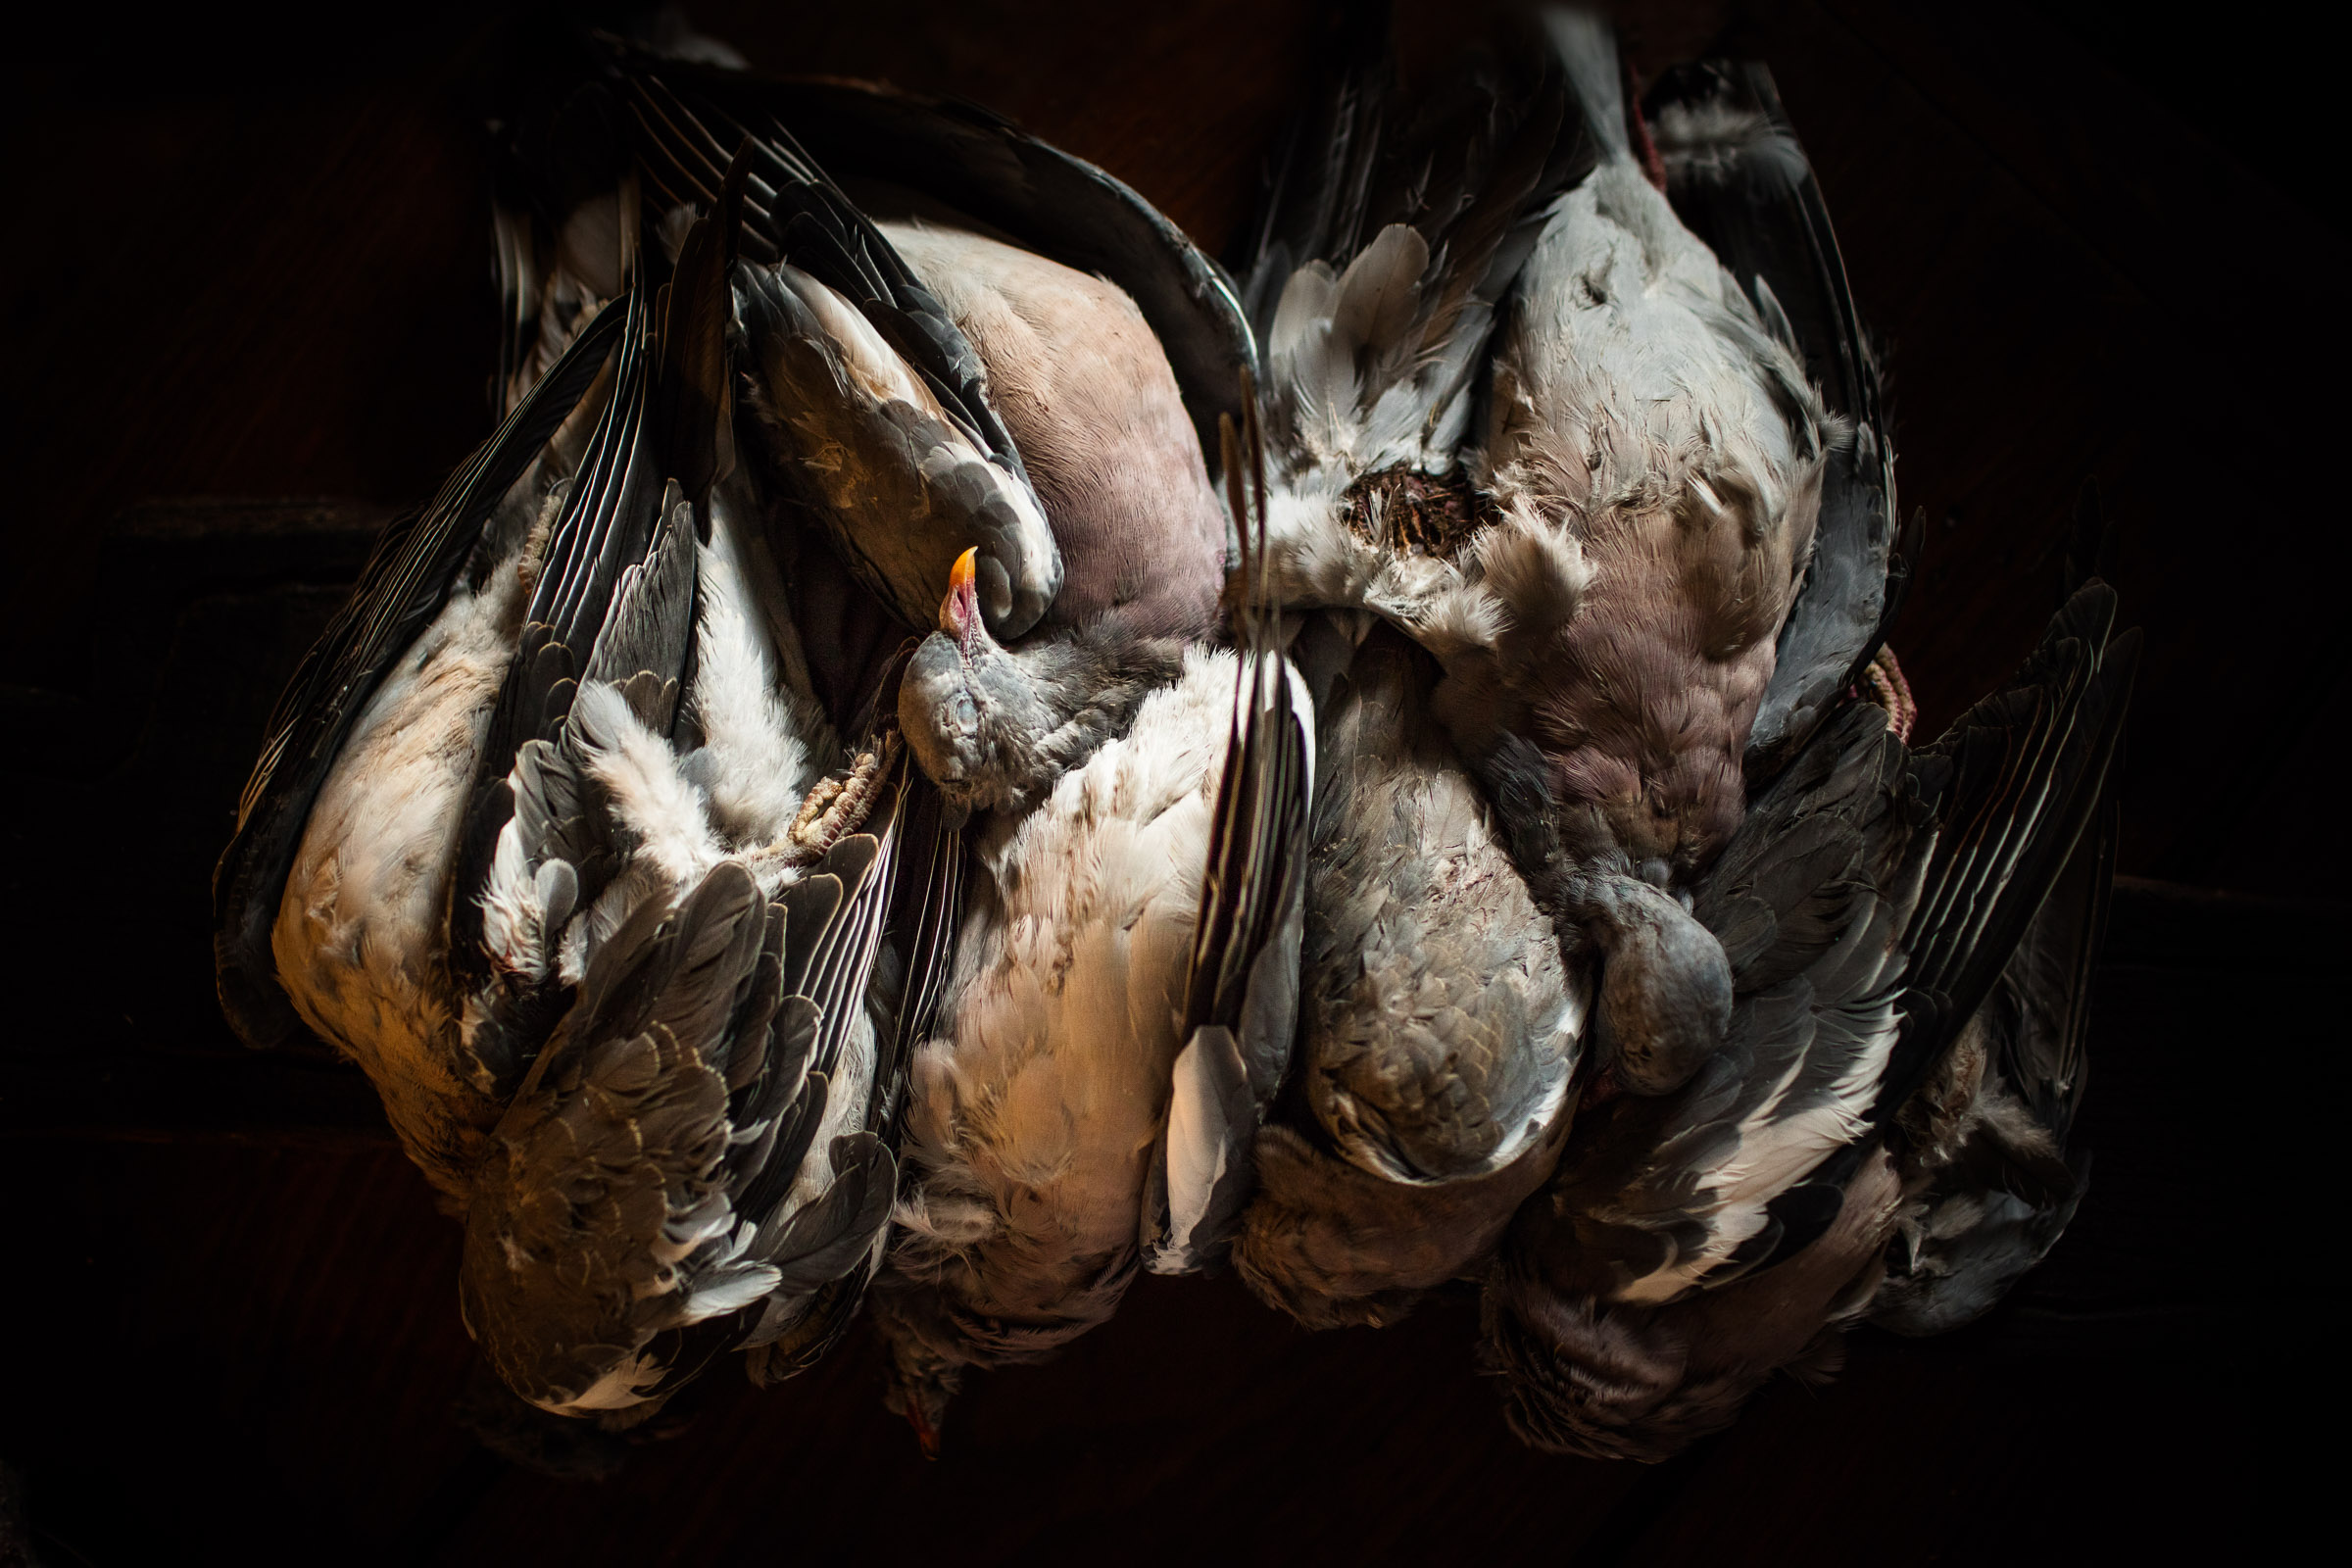 Still life of dead pigeons ready for cooking prep